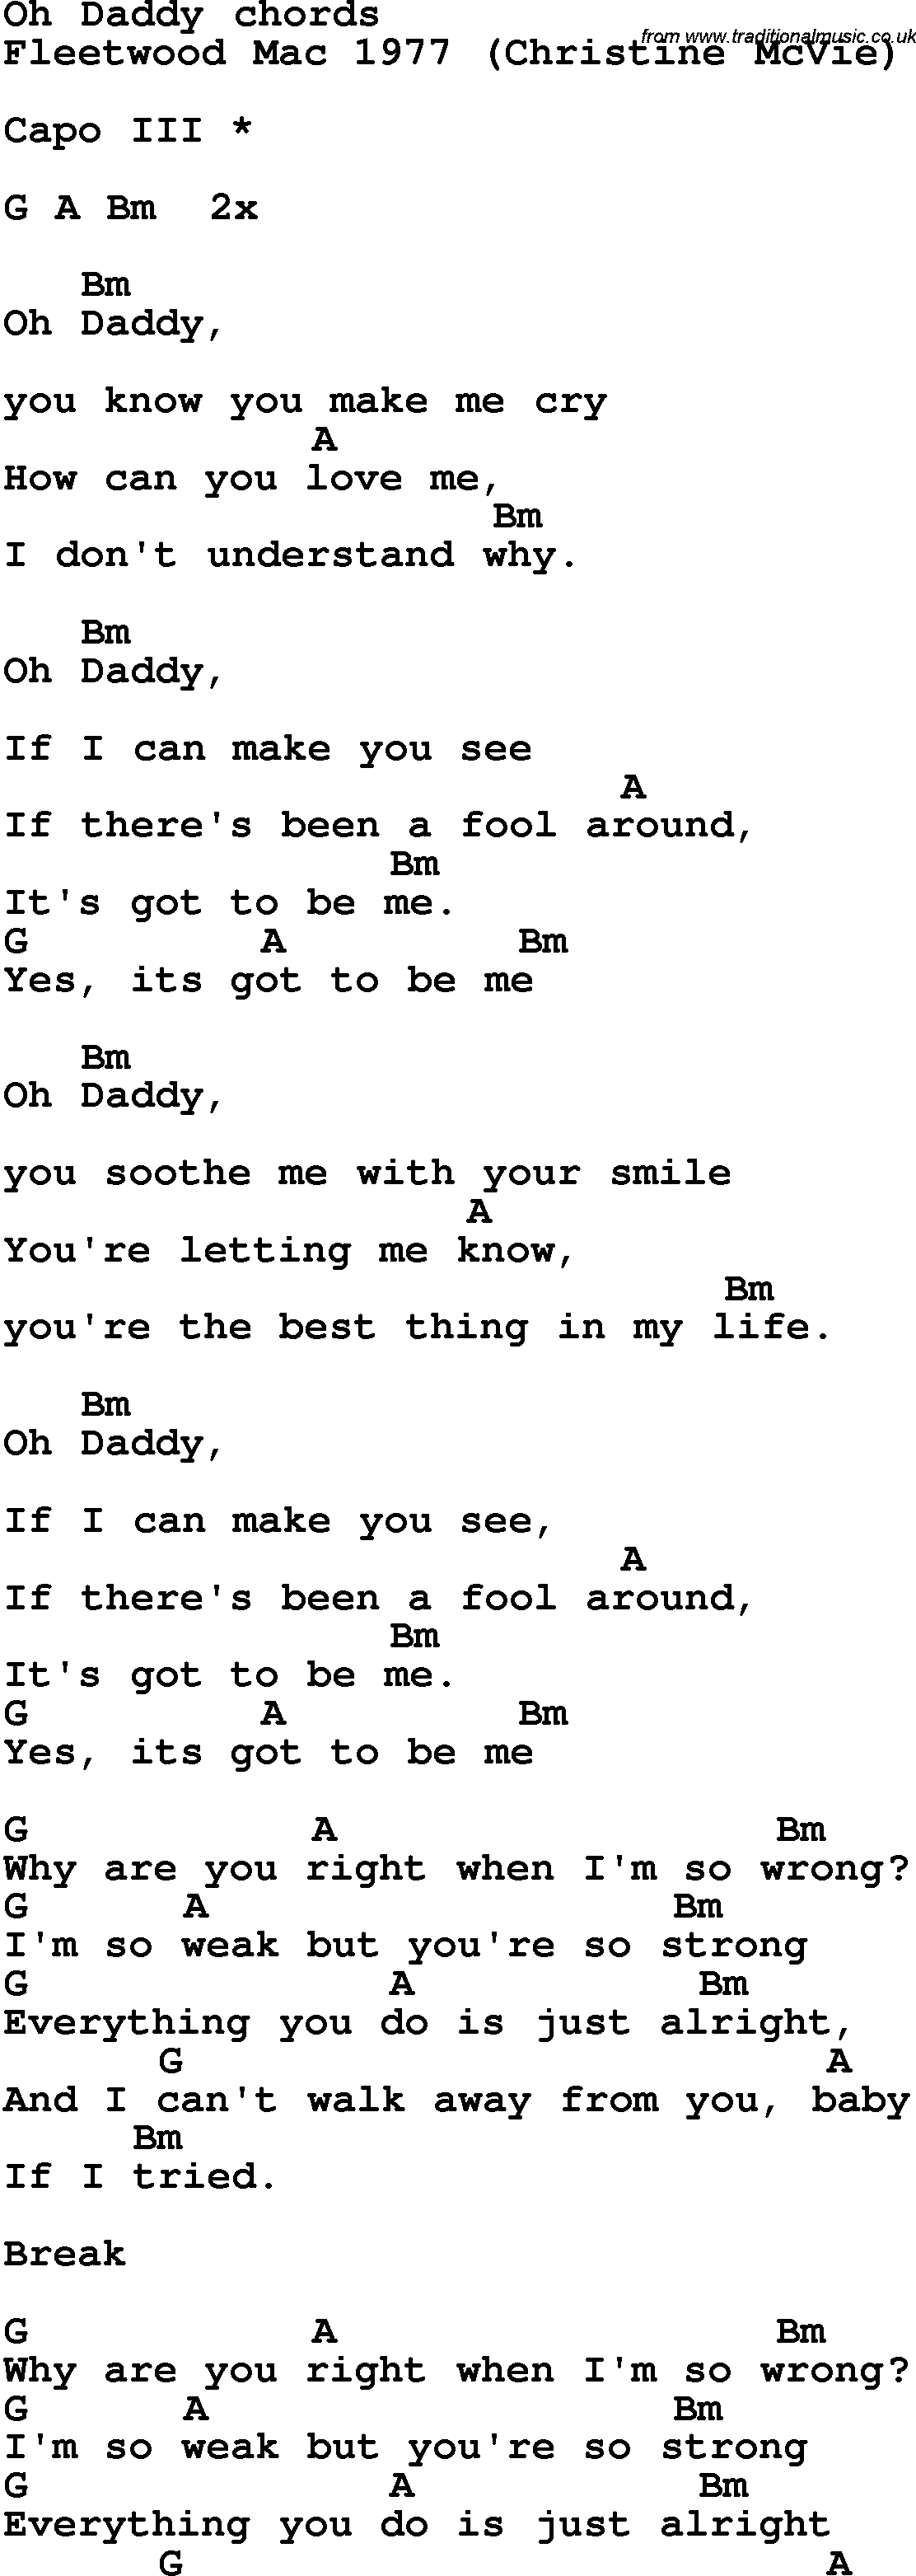 Song Lyrics with guitar chords for Oh Daddy